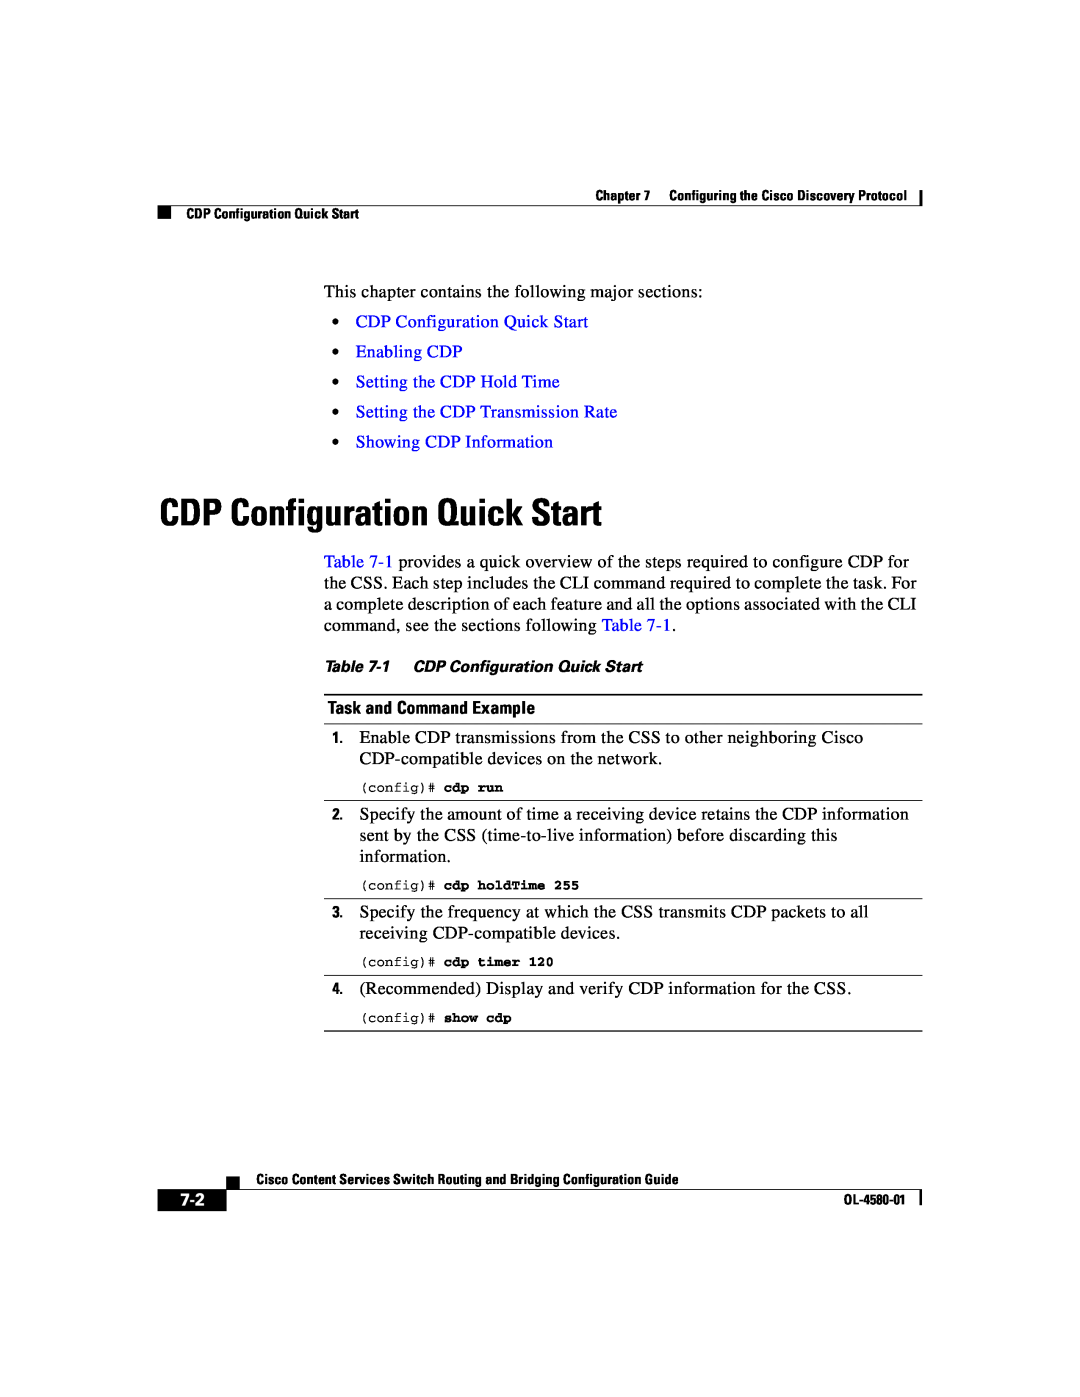 Cisco Systems OL-4580-01 manual CDP Configuration Quick Start, Setting the CDP Transmission Rate Showing CDP Information 